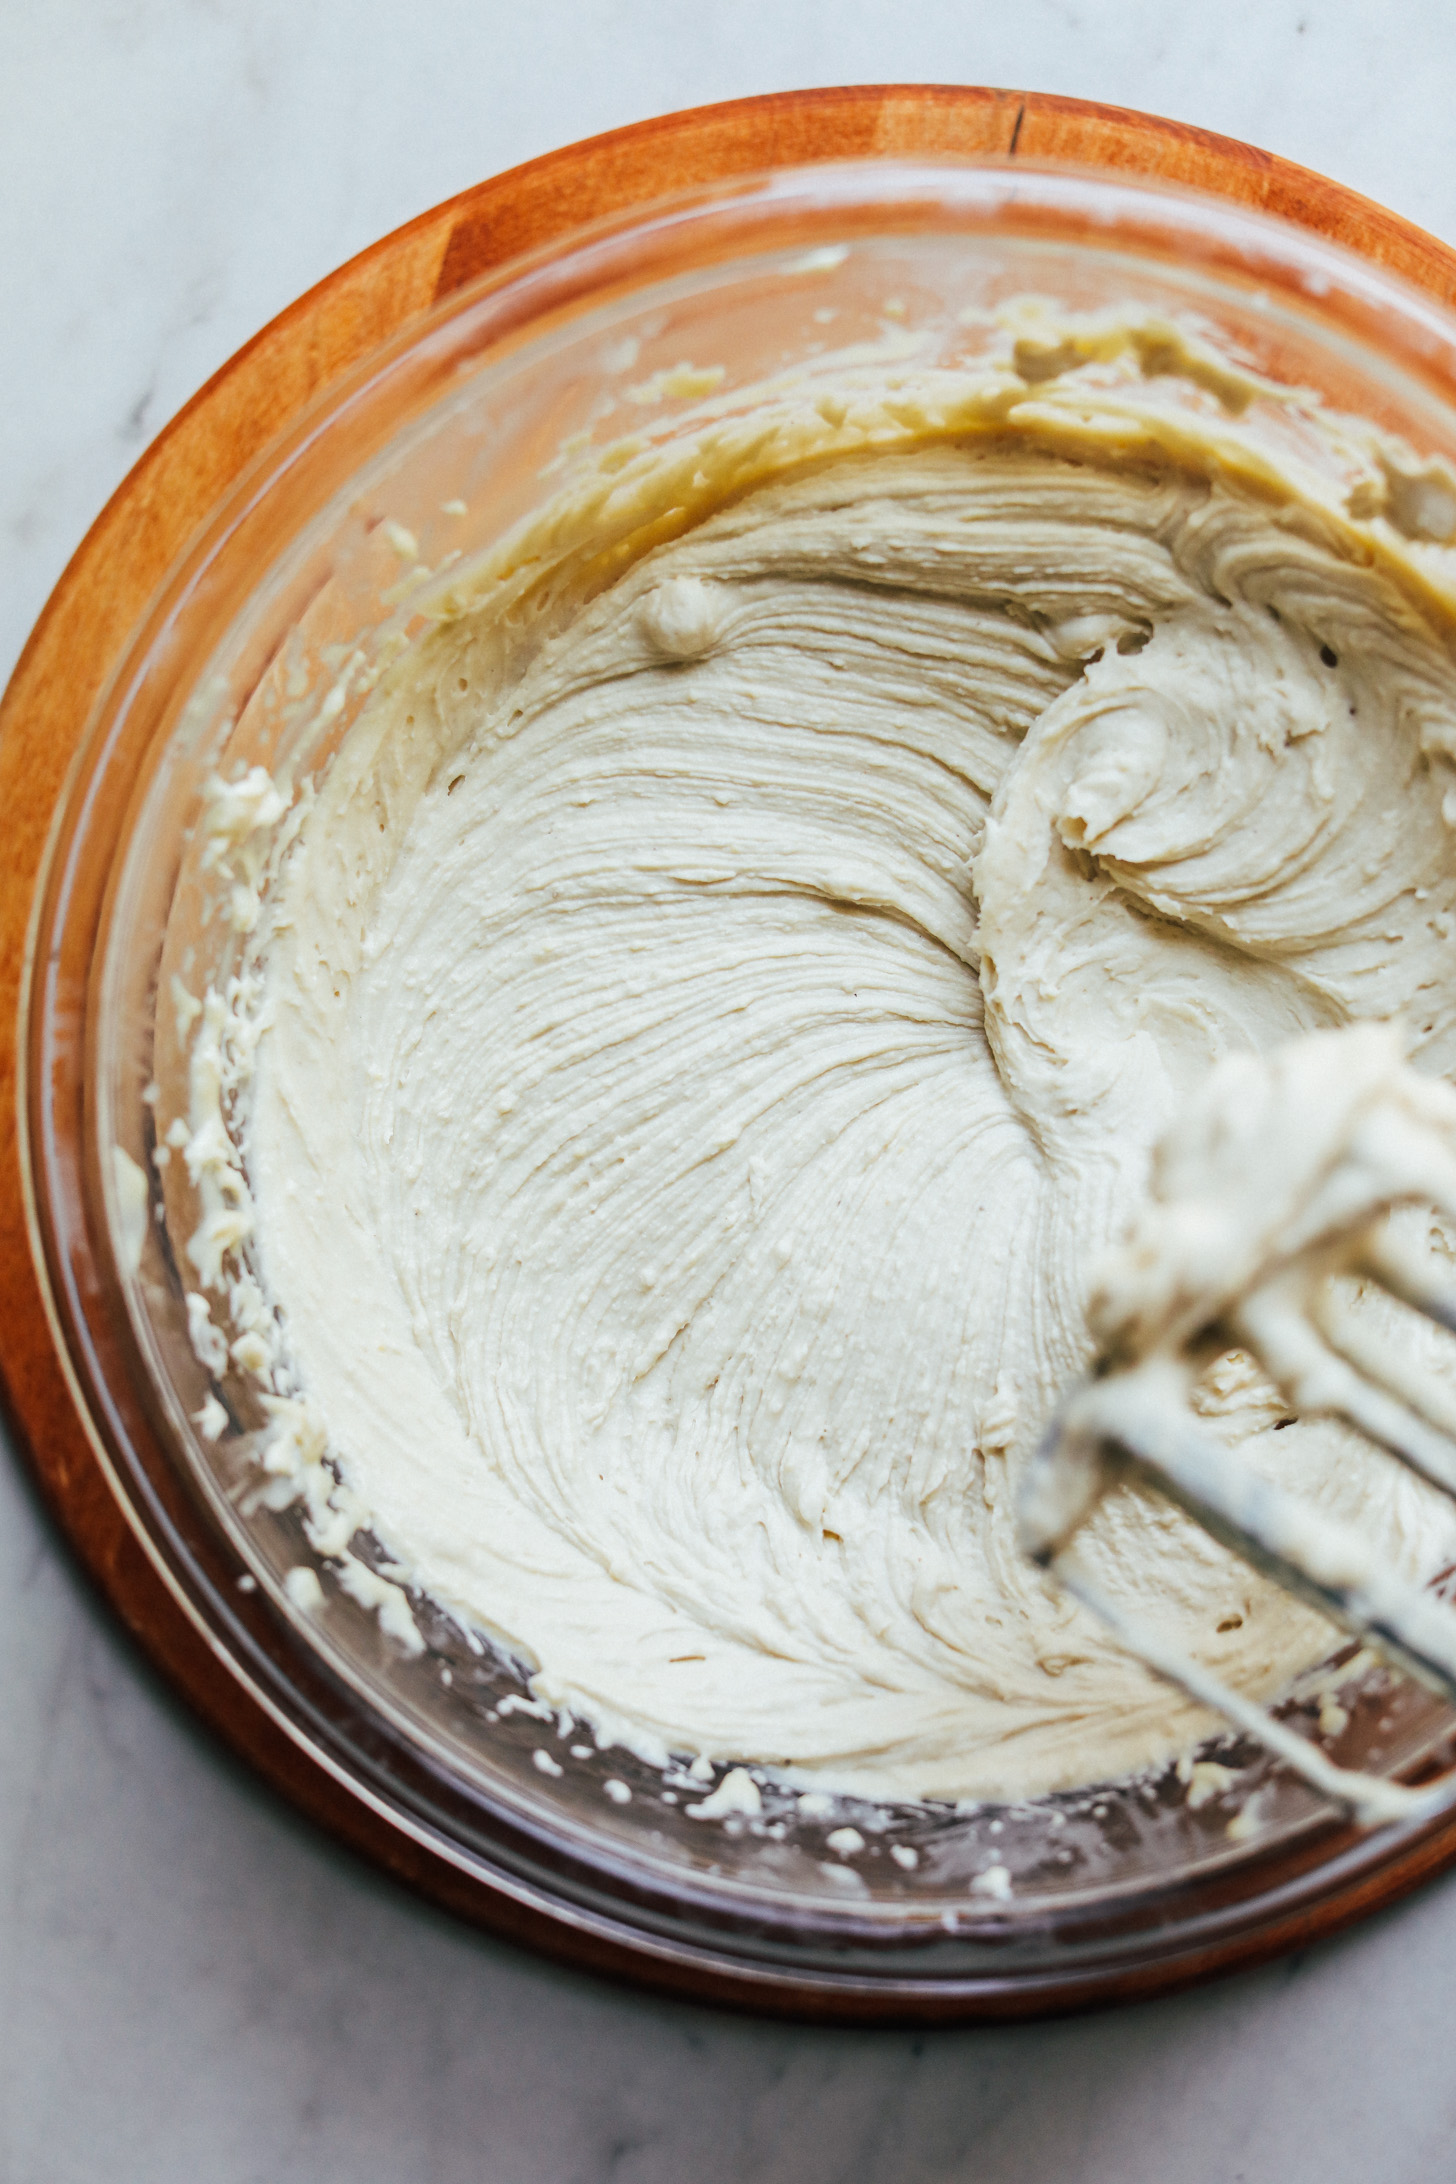 Freshly whipped Cashew Buttercream Frosting made from simple ingredients